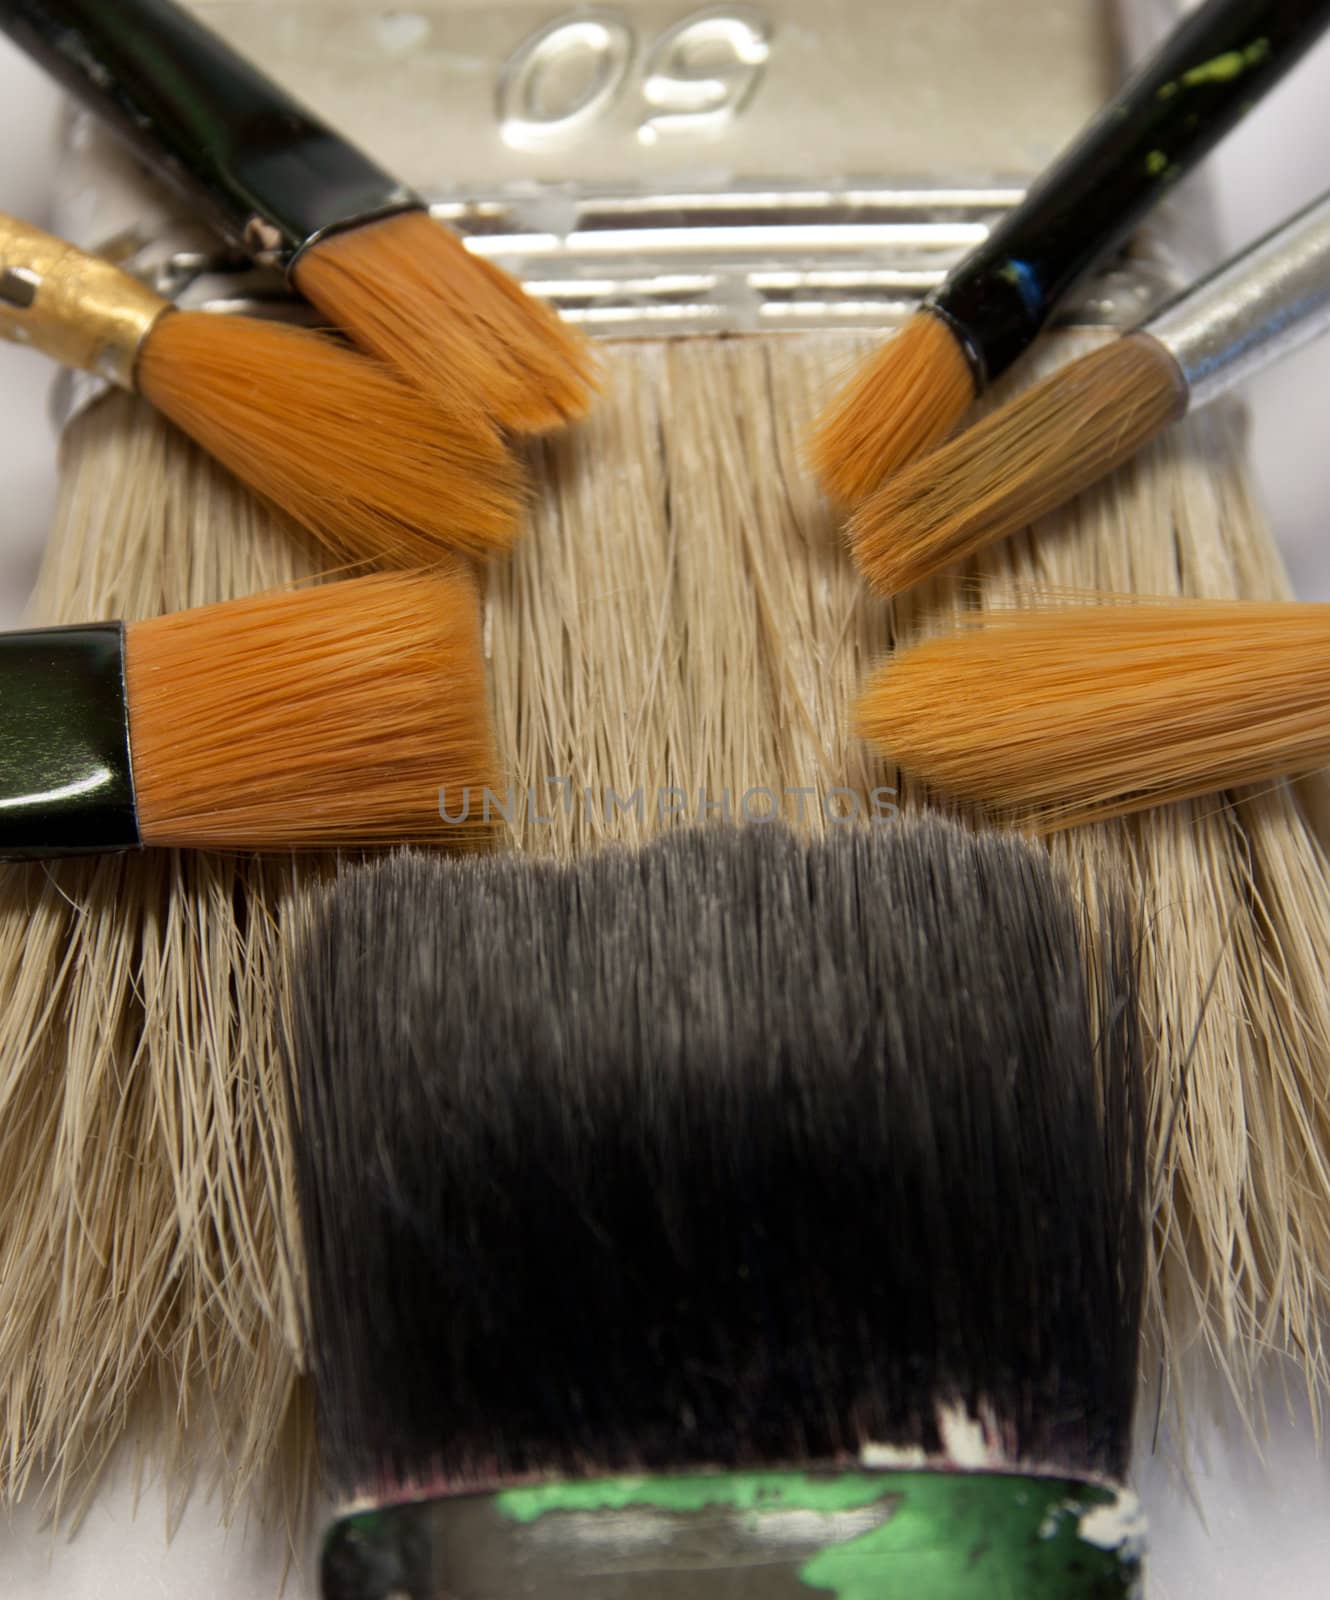 close up of different paintbrushes sizes, colors